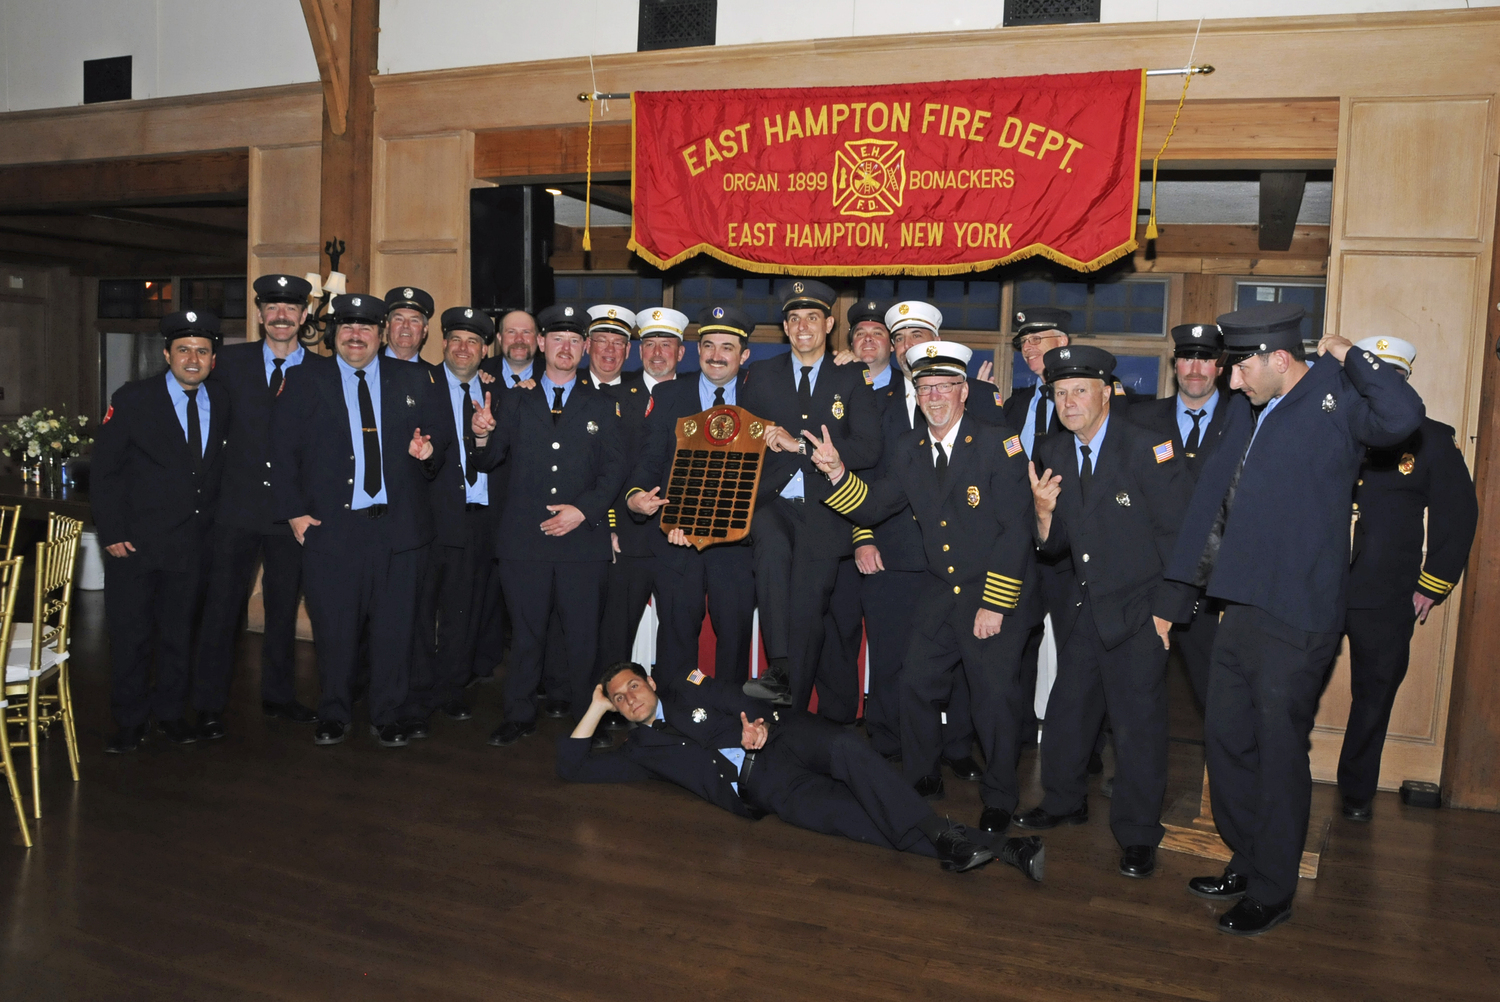 Members of  Company No. 2, (Engine Company) with the Company of the Year Award for 2023 at the East Hampton Fire Department's 125th Annual Inspection Dinner at the Maidstone Club on Saturday.  RICHARD LEWIN